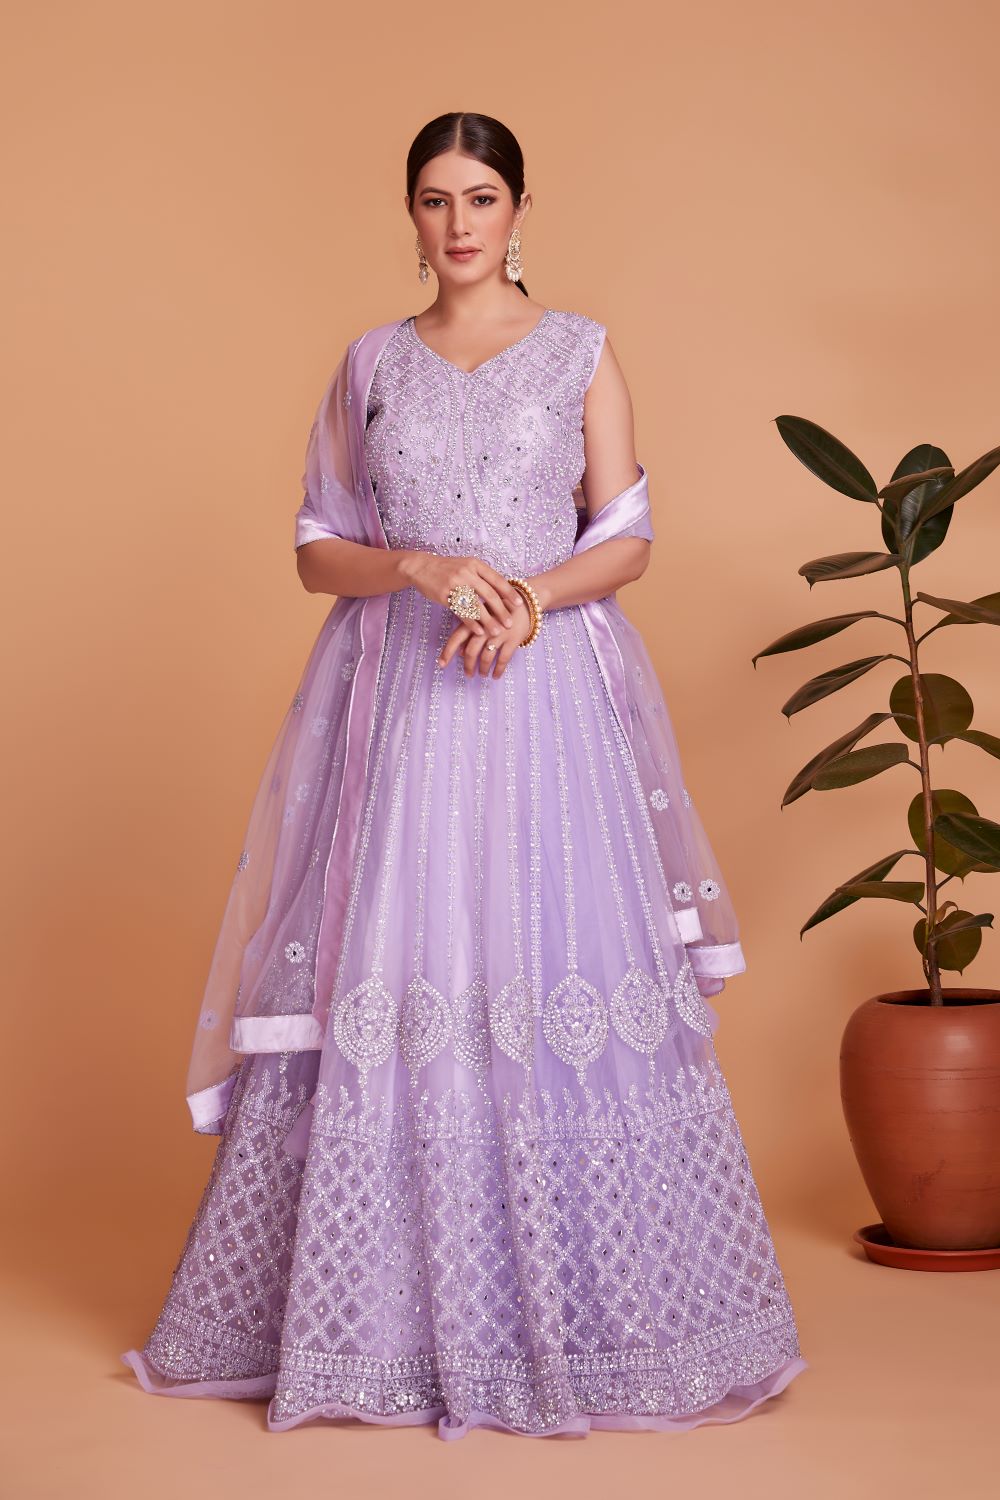 Dazzling Lavender Delight: A Jarkan Diamond-Adorned Party Gown